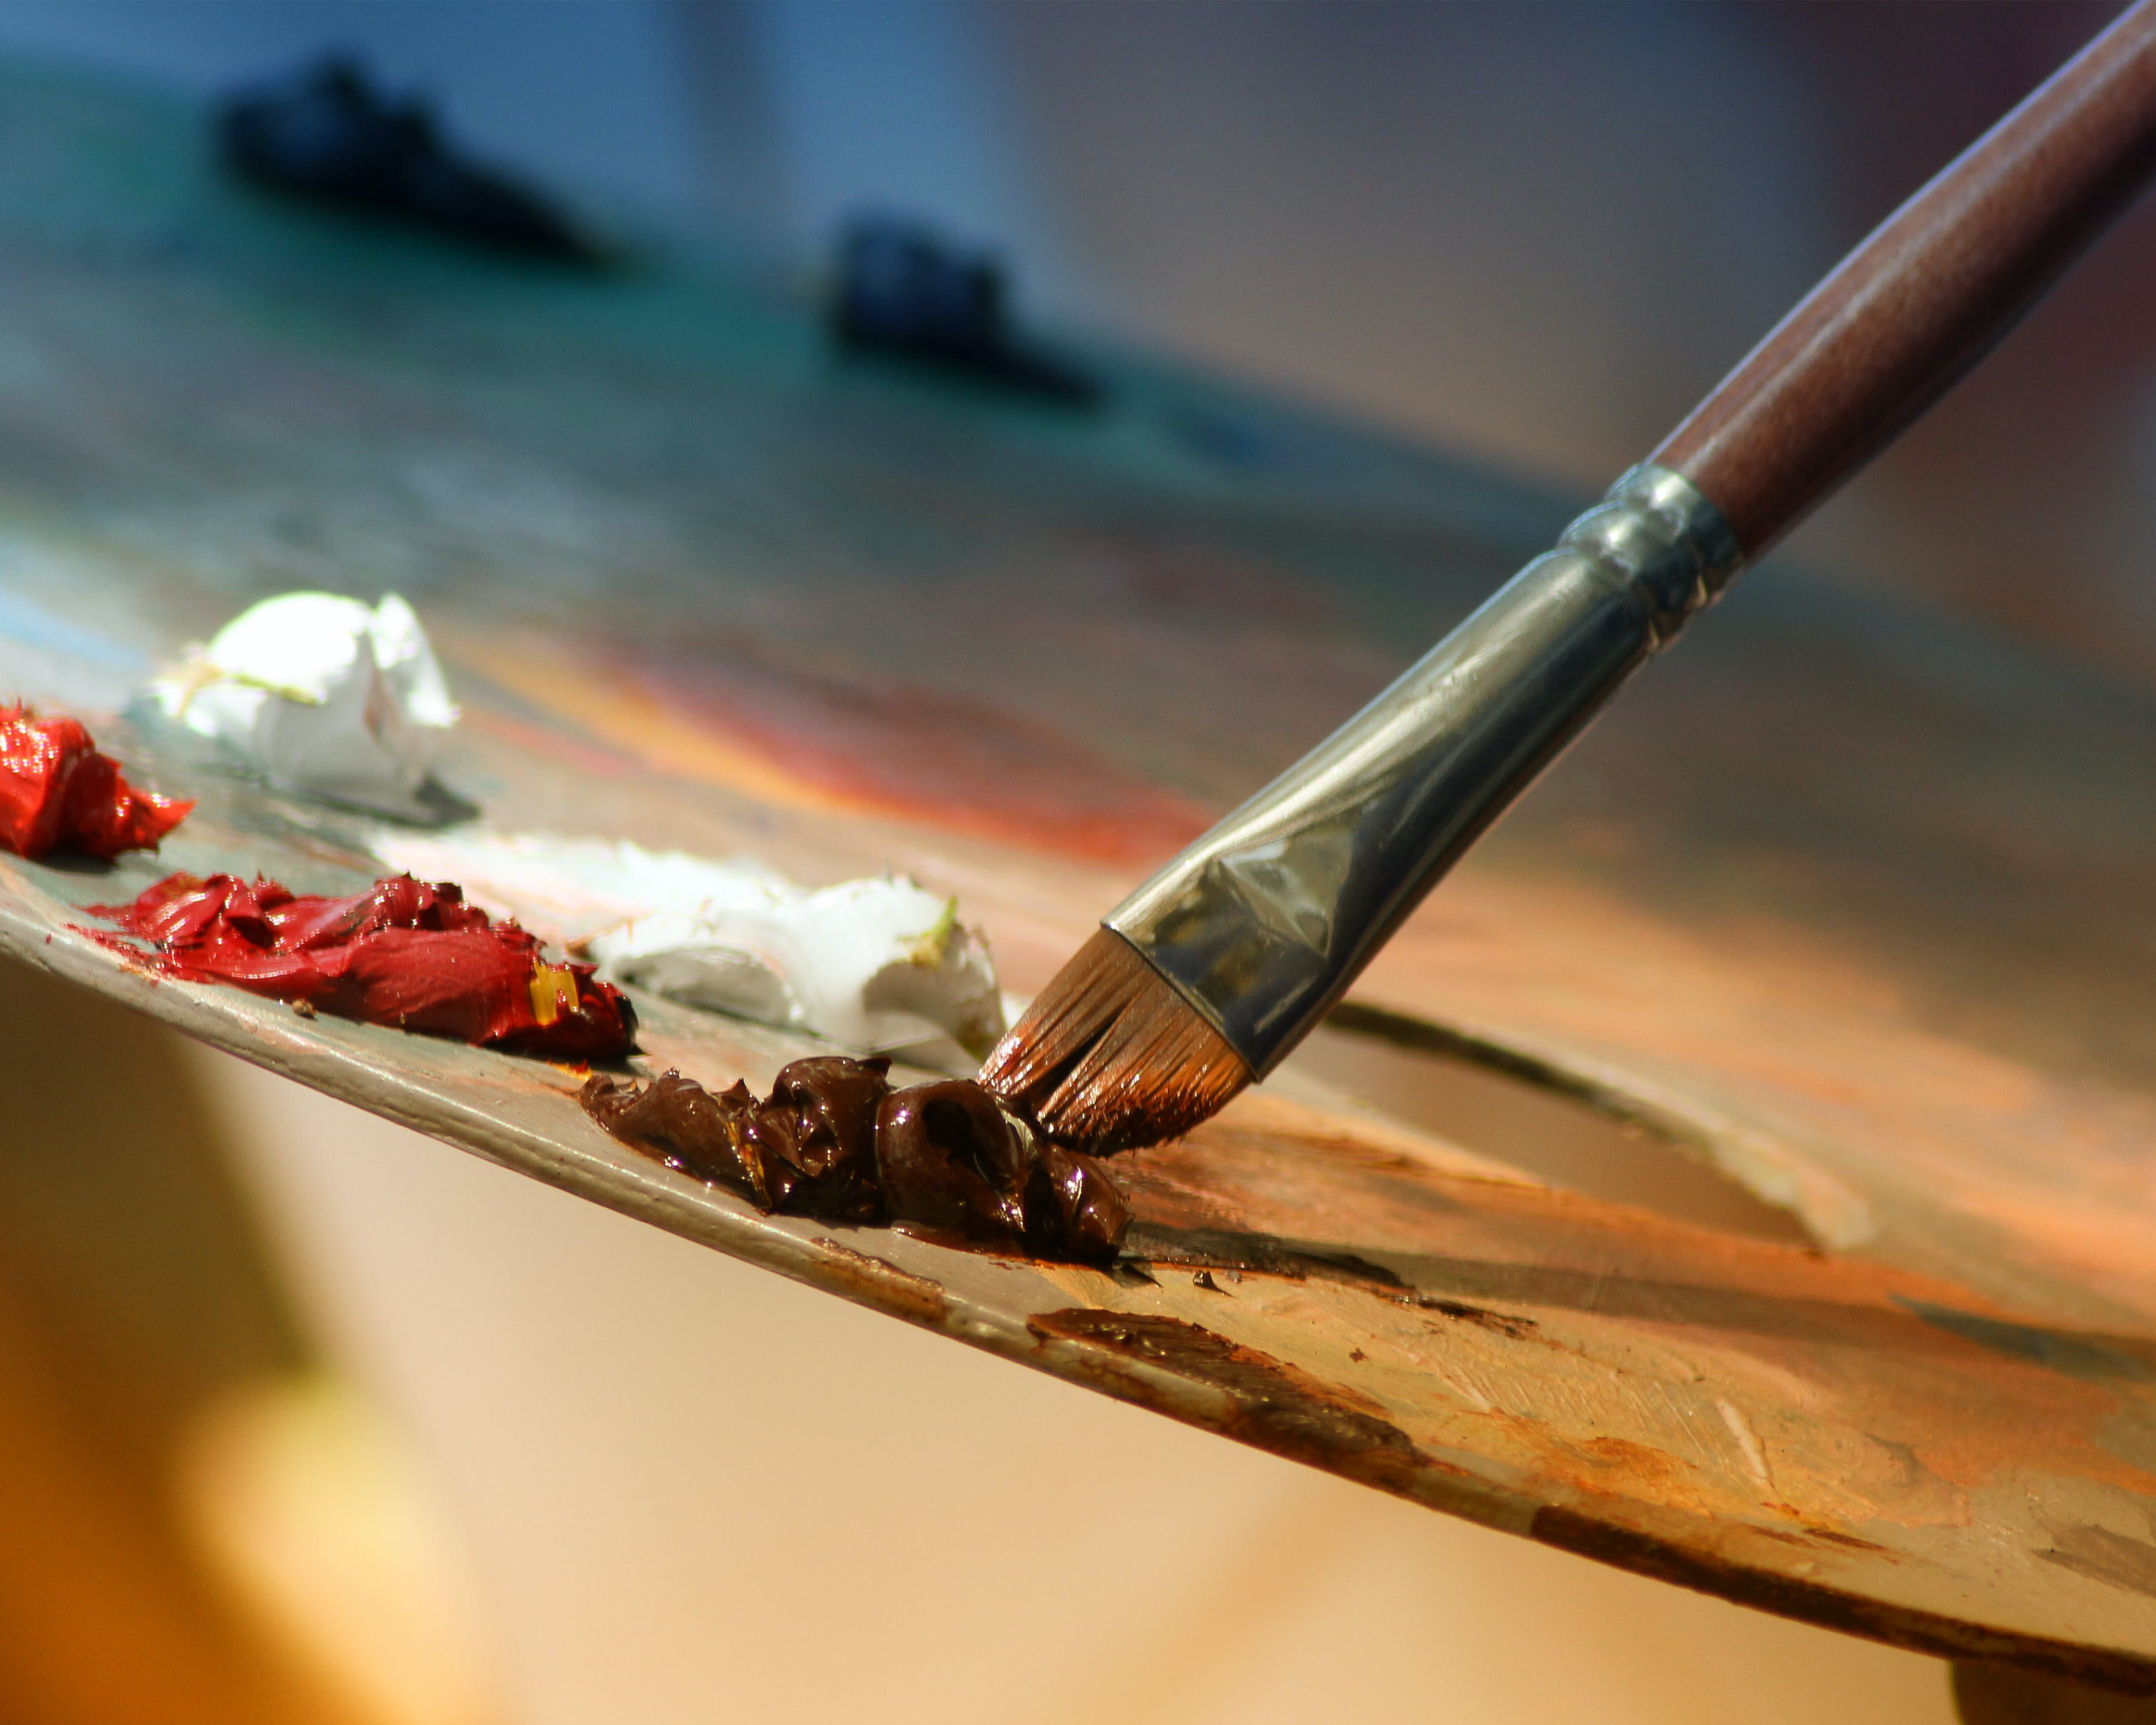 An image of a paintbrush picking up brown oil paint from a traditional paint palette.